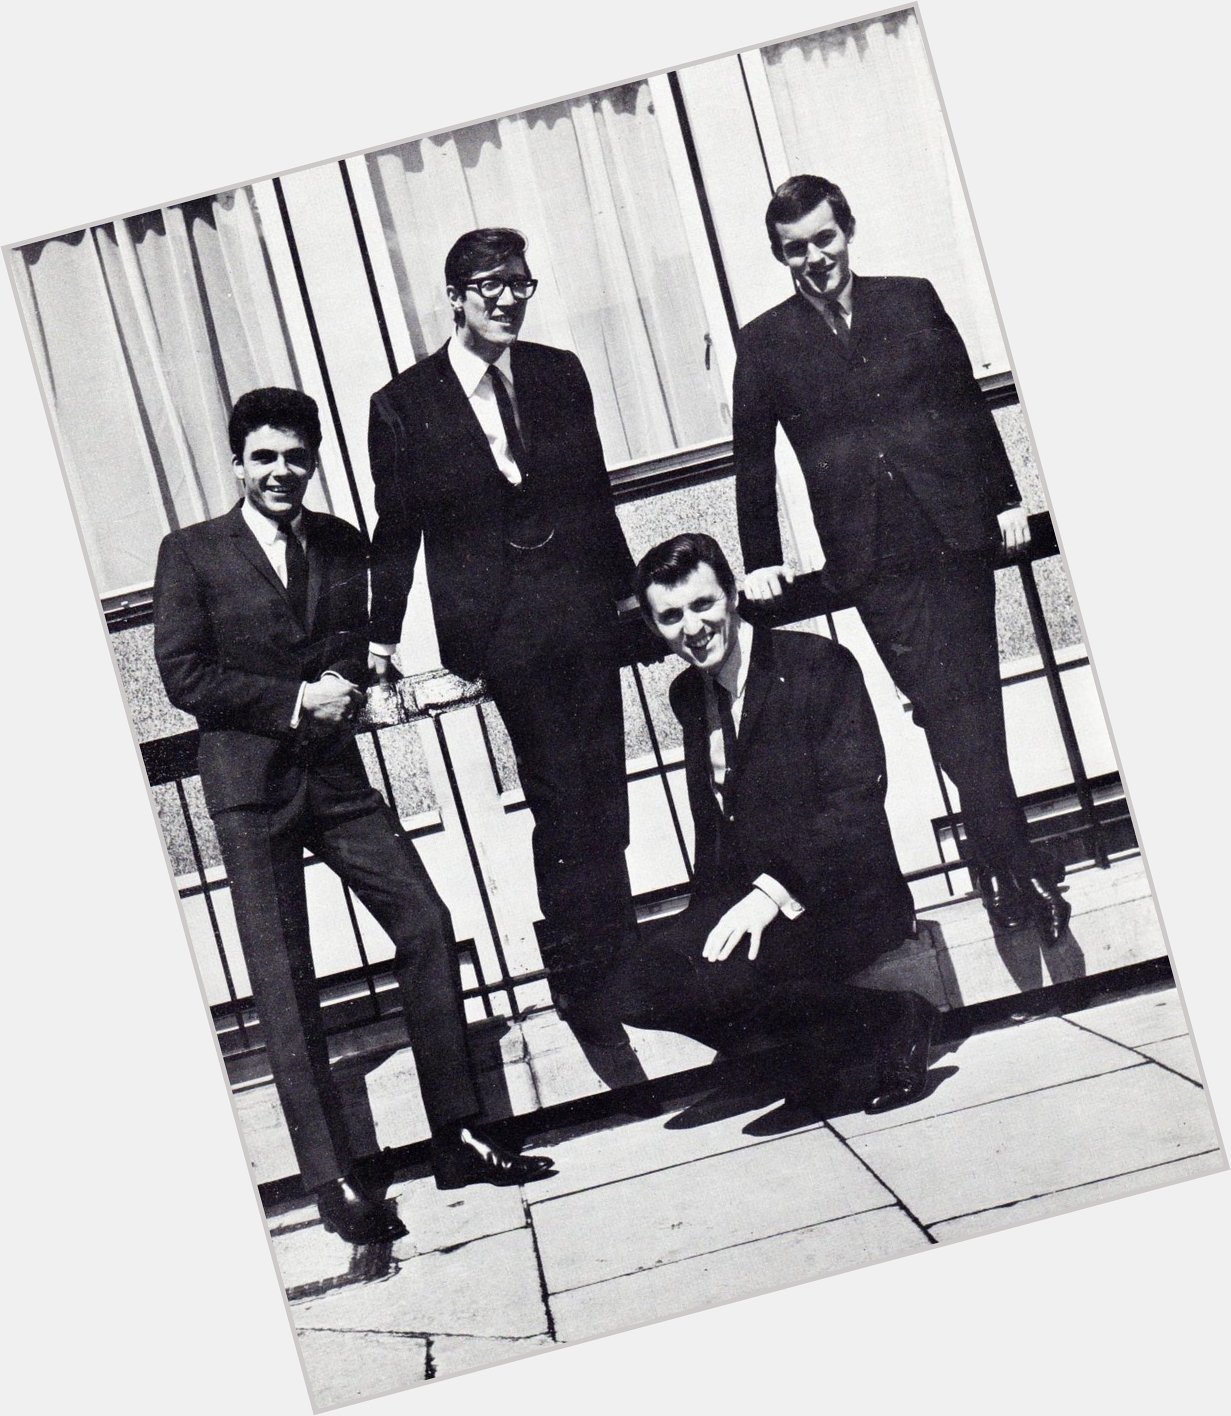 Wishing Hank Marvin a happy 81st birthday today... pic from The Shadows 5th Album Of Guitar Favourites 1964  